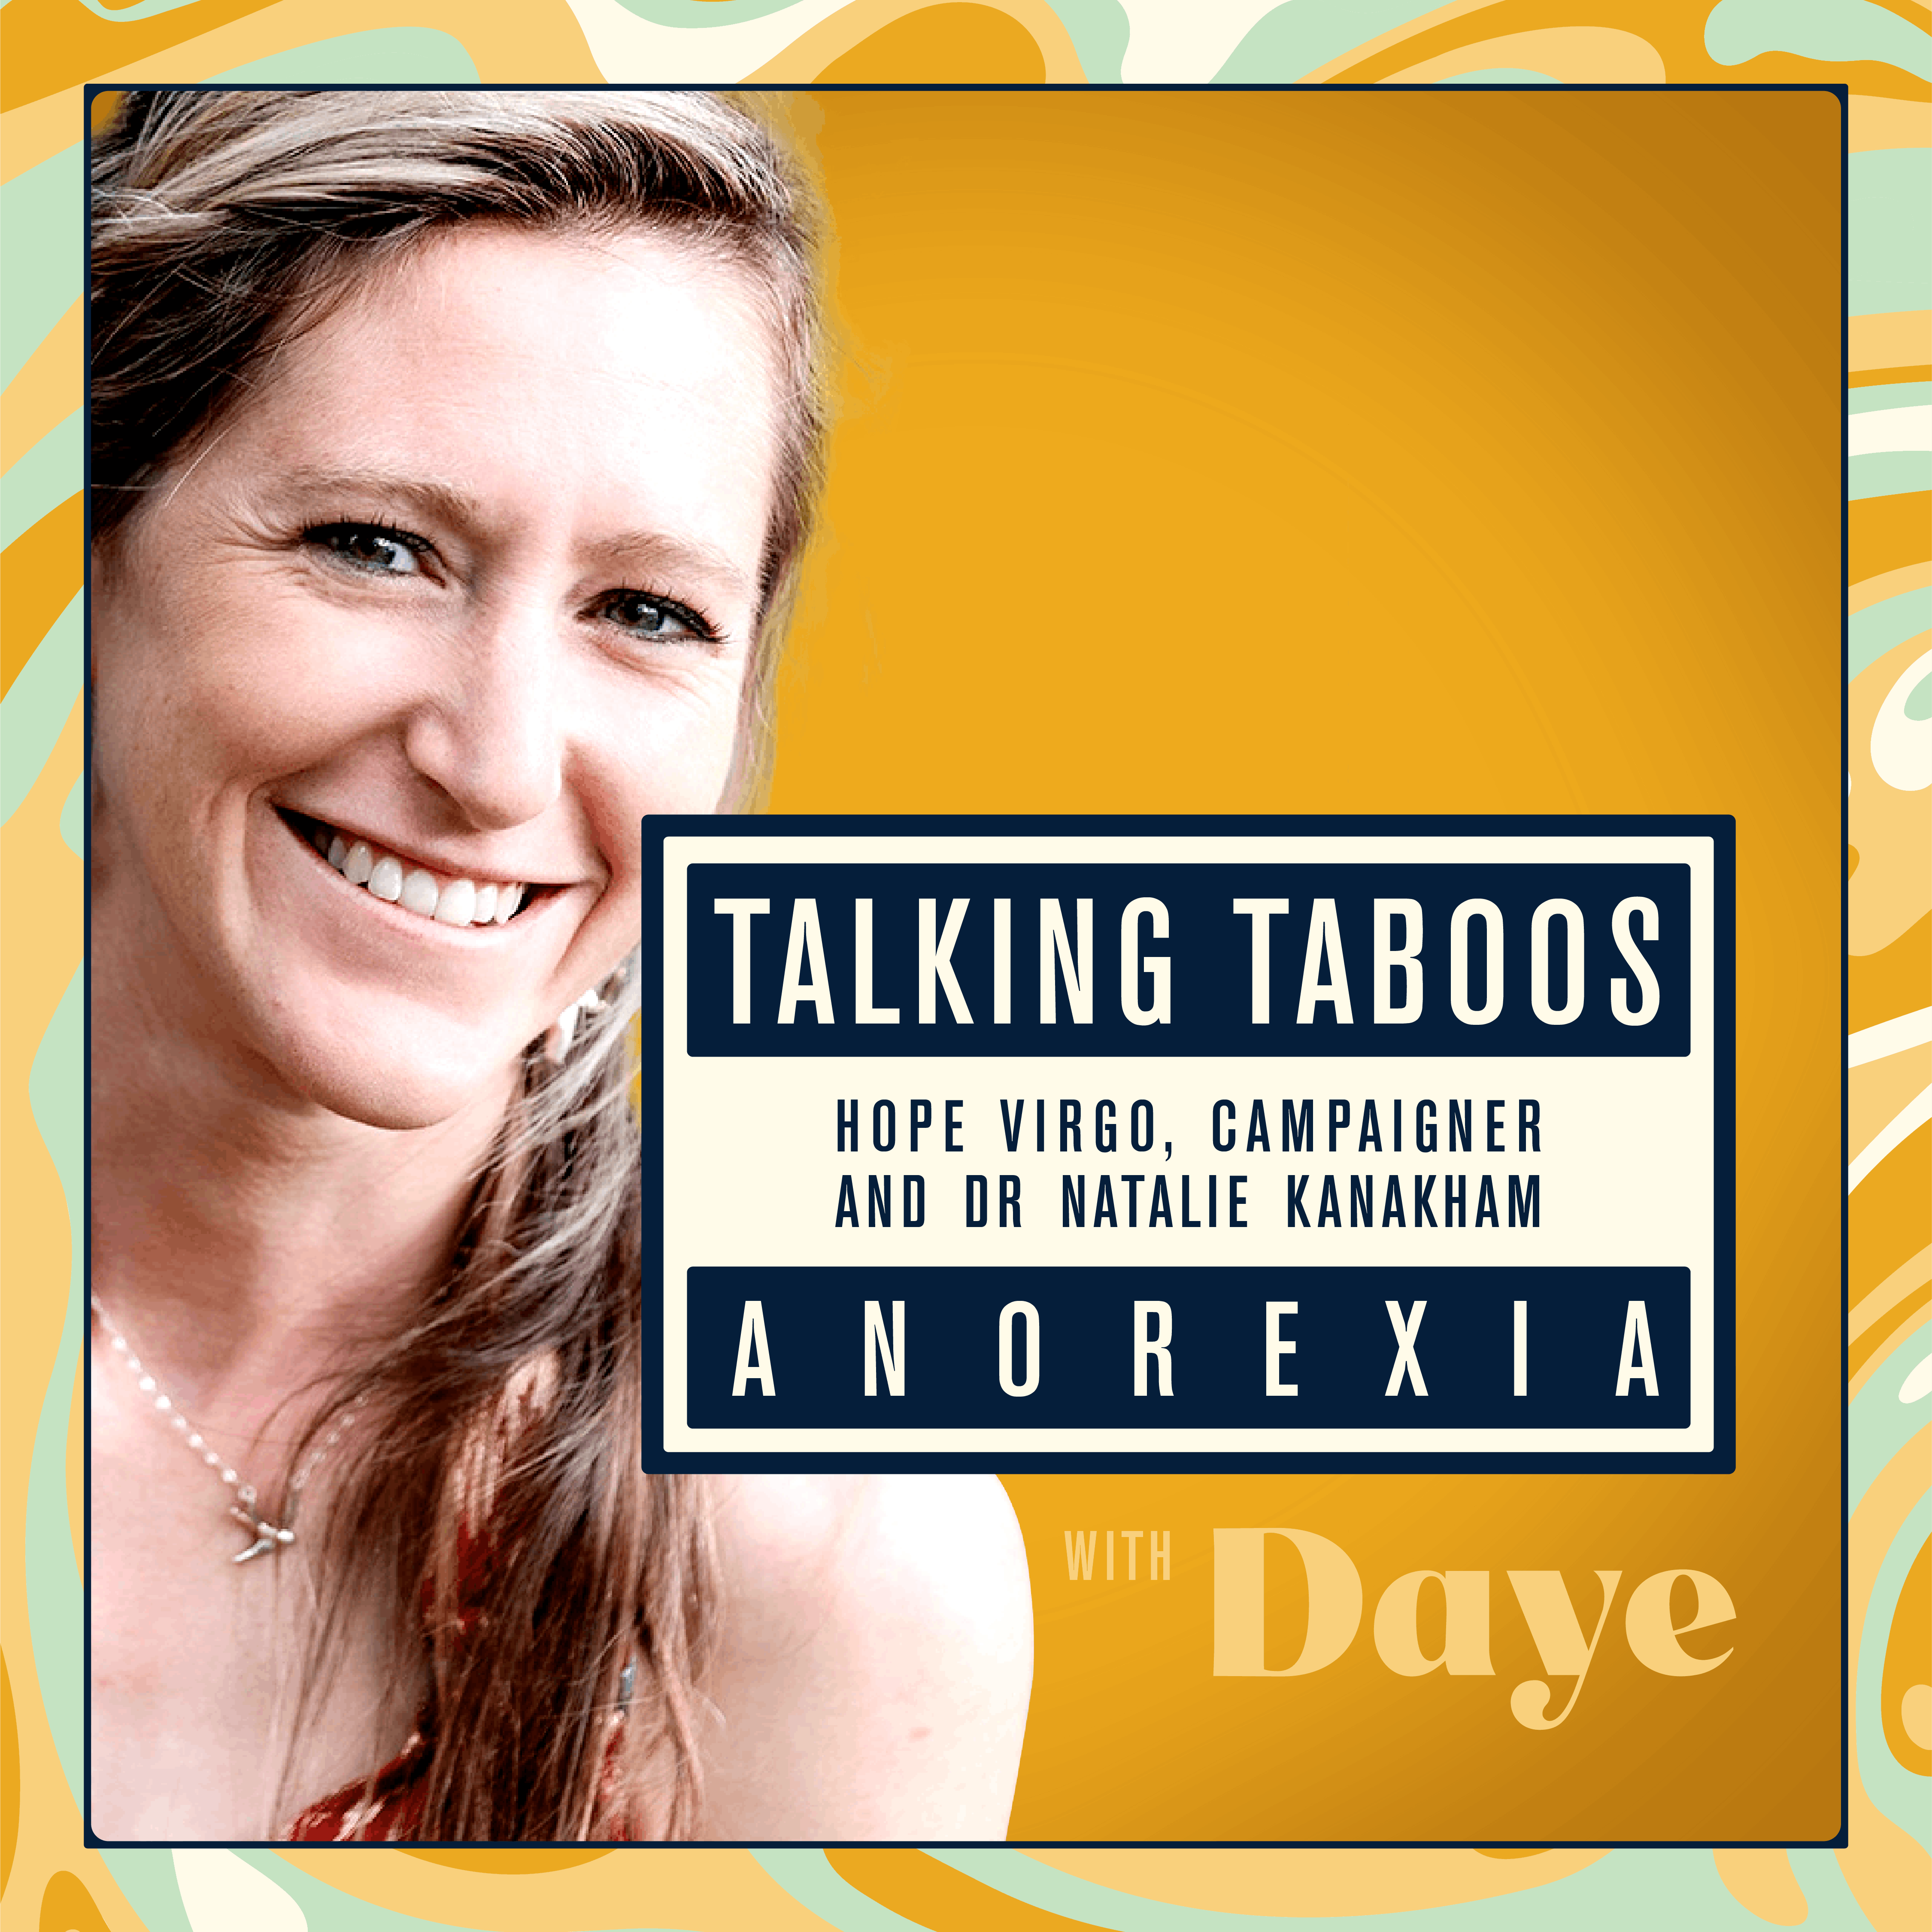 Talking Taboos with Daye: Anorexia